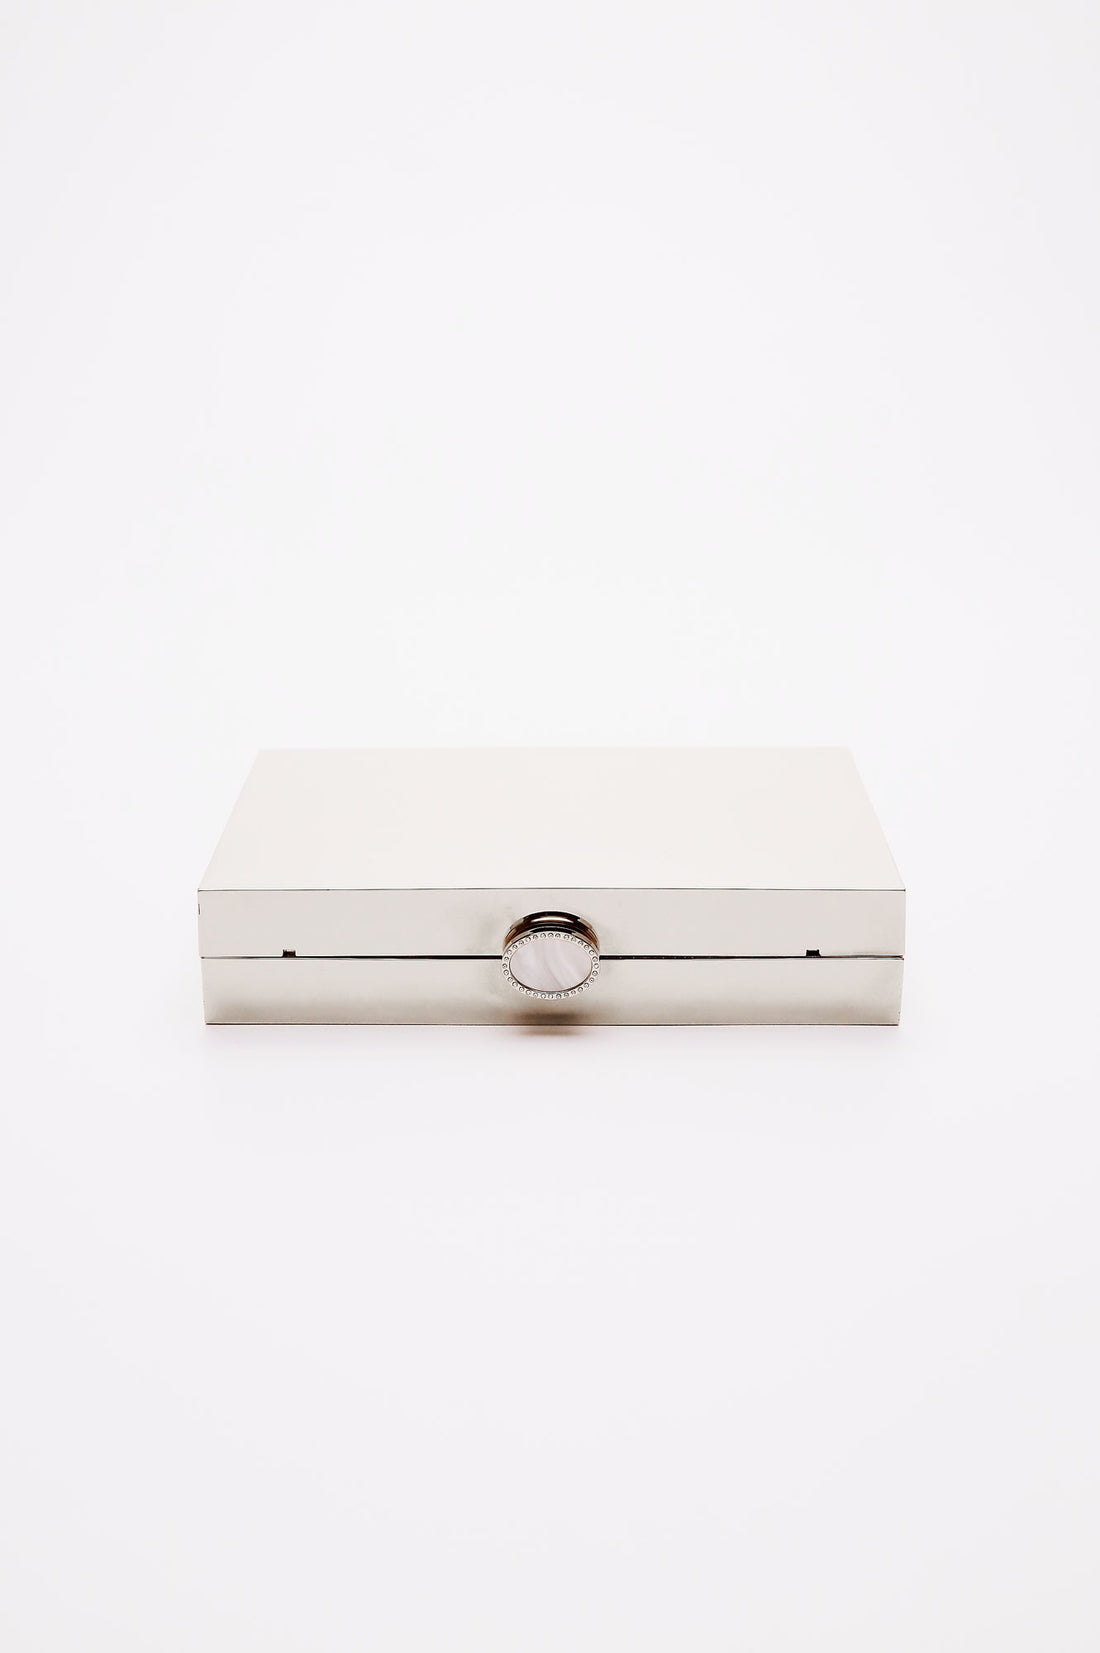 Talich clutch in reflective silver mirror laying on its side, showing the top clasp with a mother of pearl and crystal lined clasp.